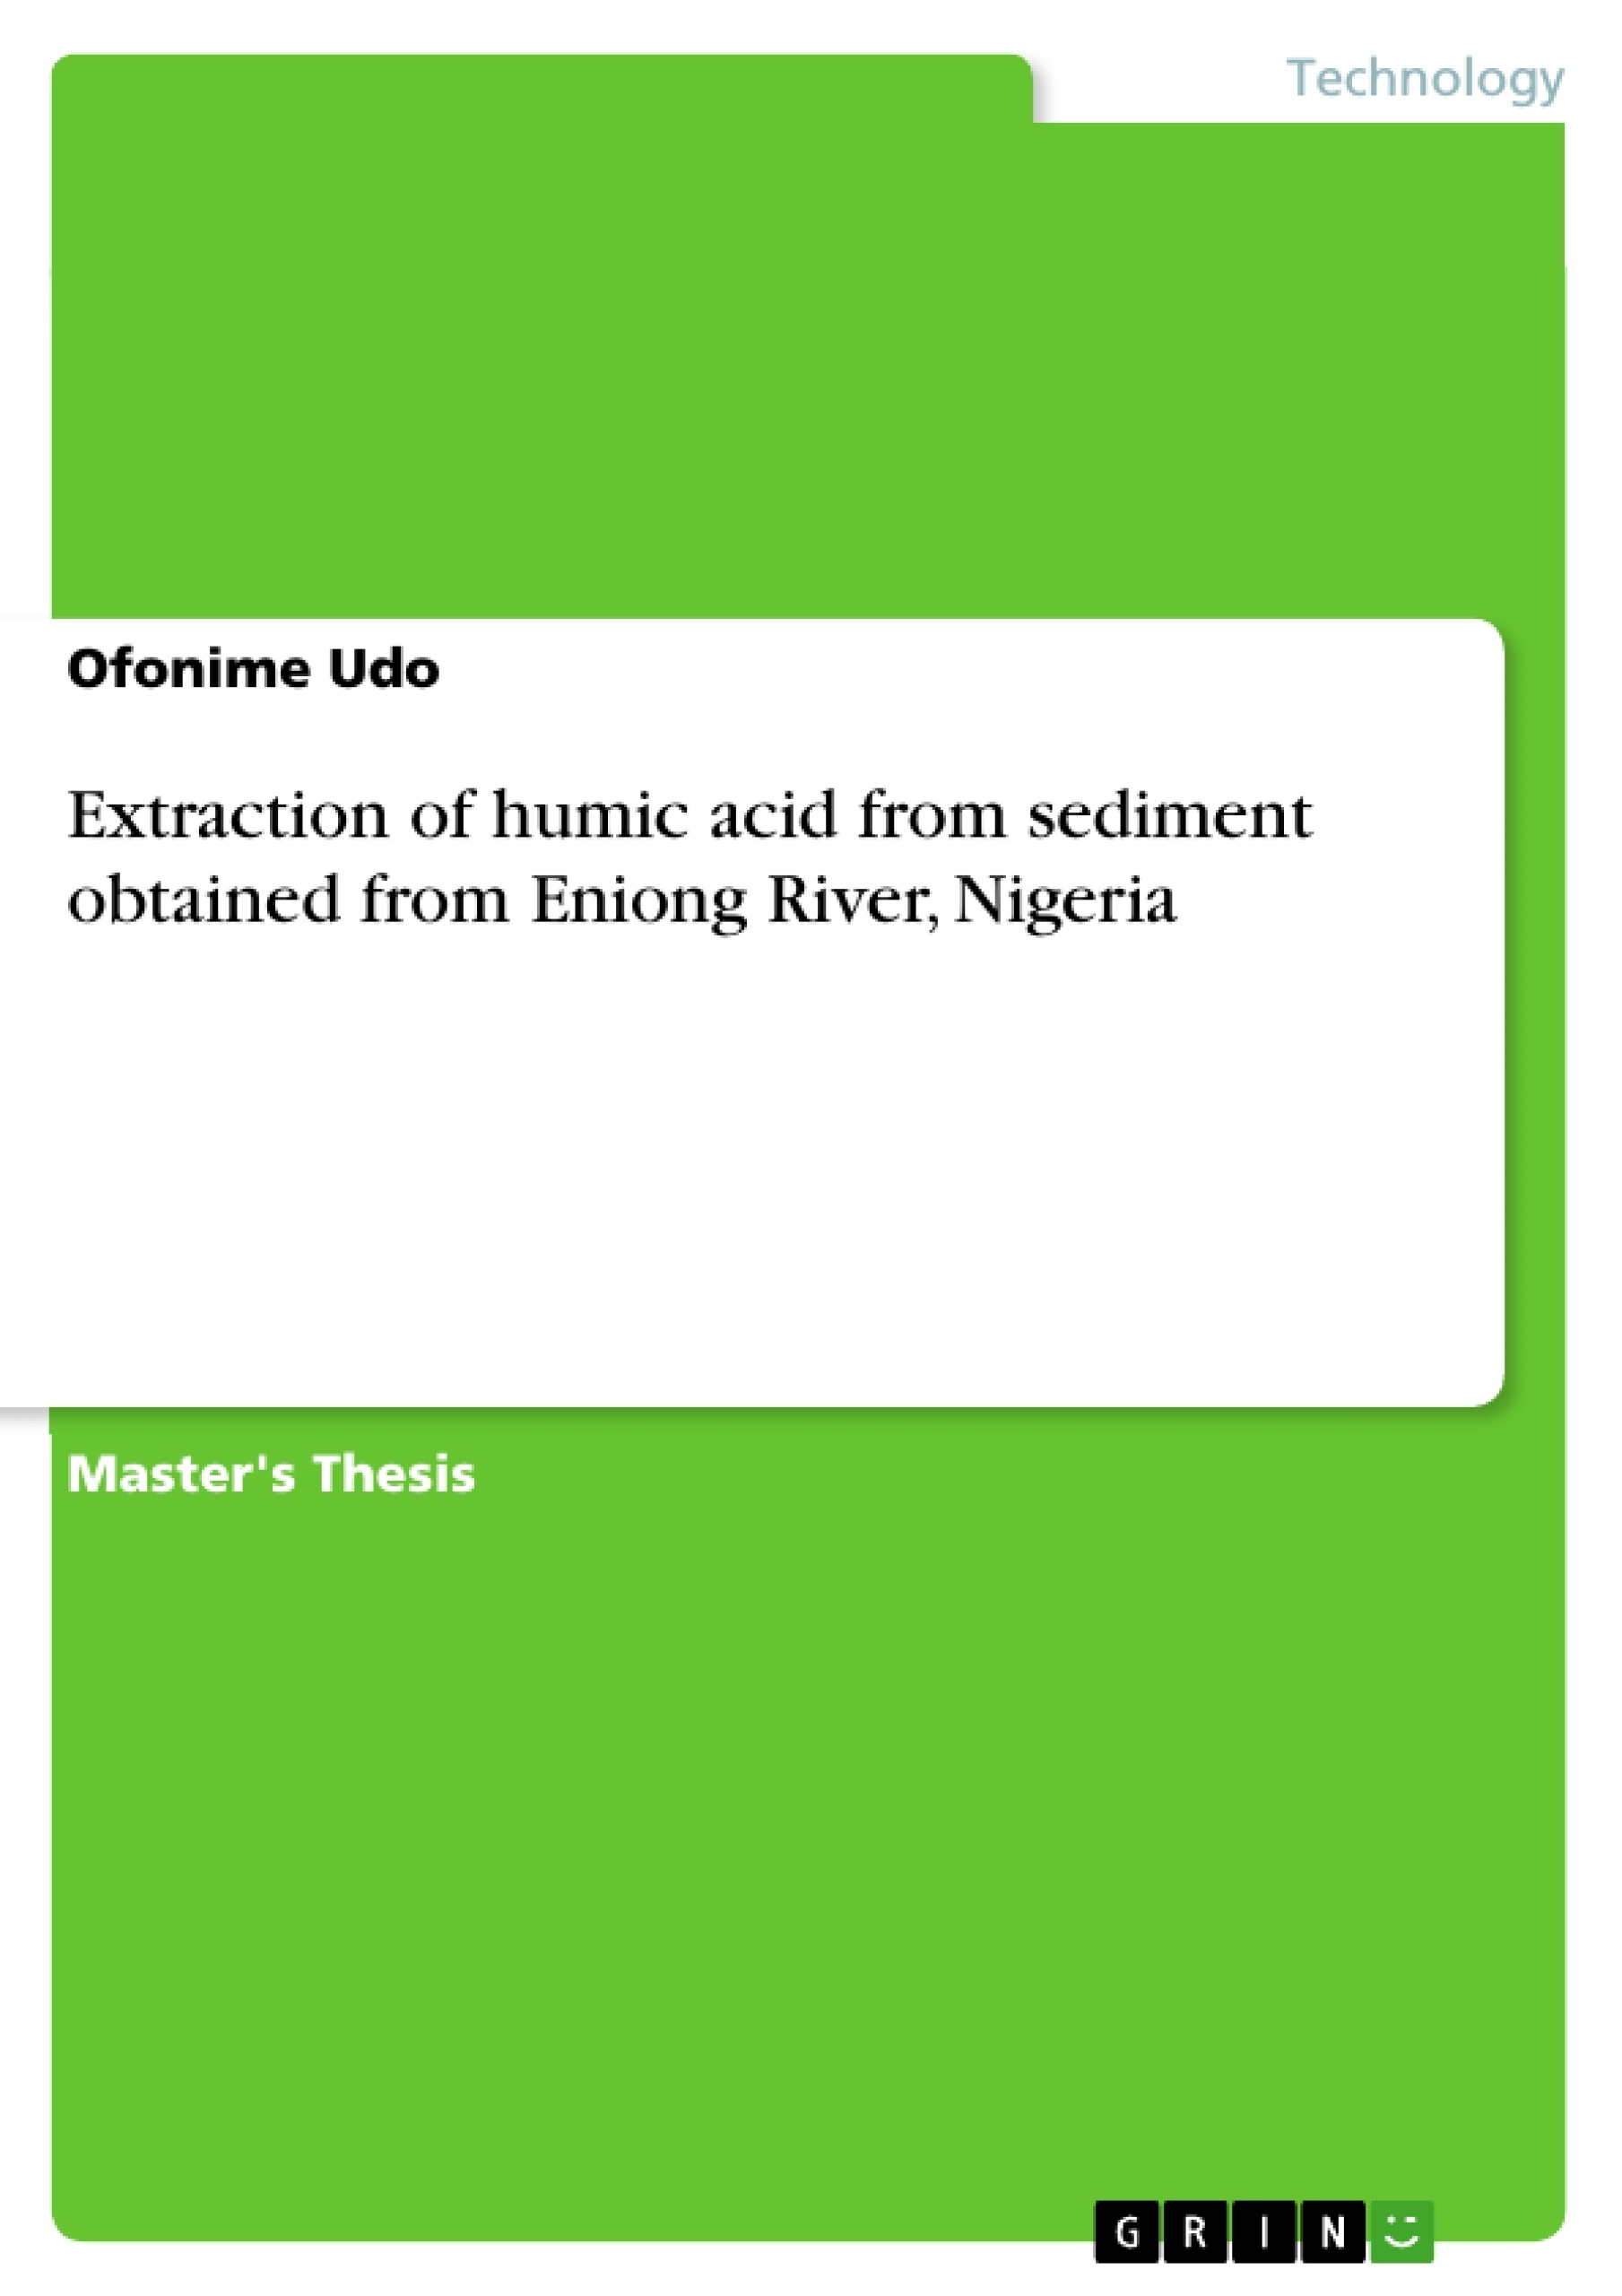 Titre: Extraction of humic acid from sediment obtained from Eniong River, Nigeria